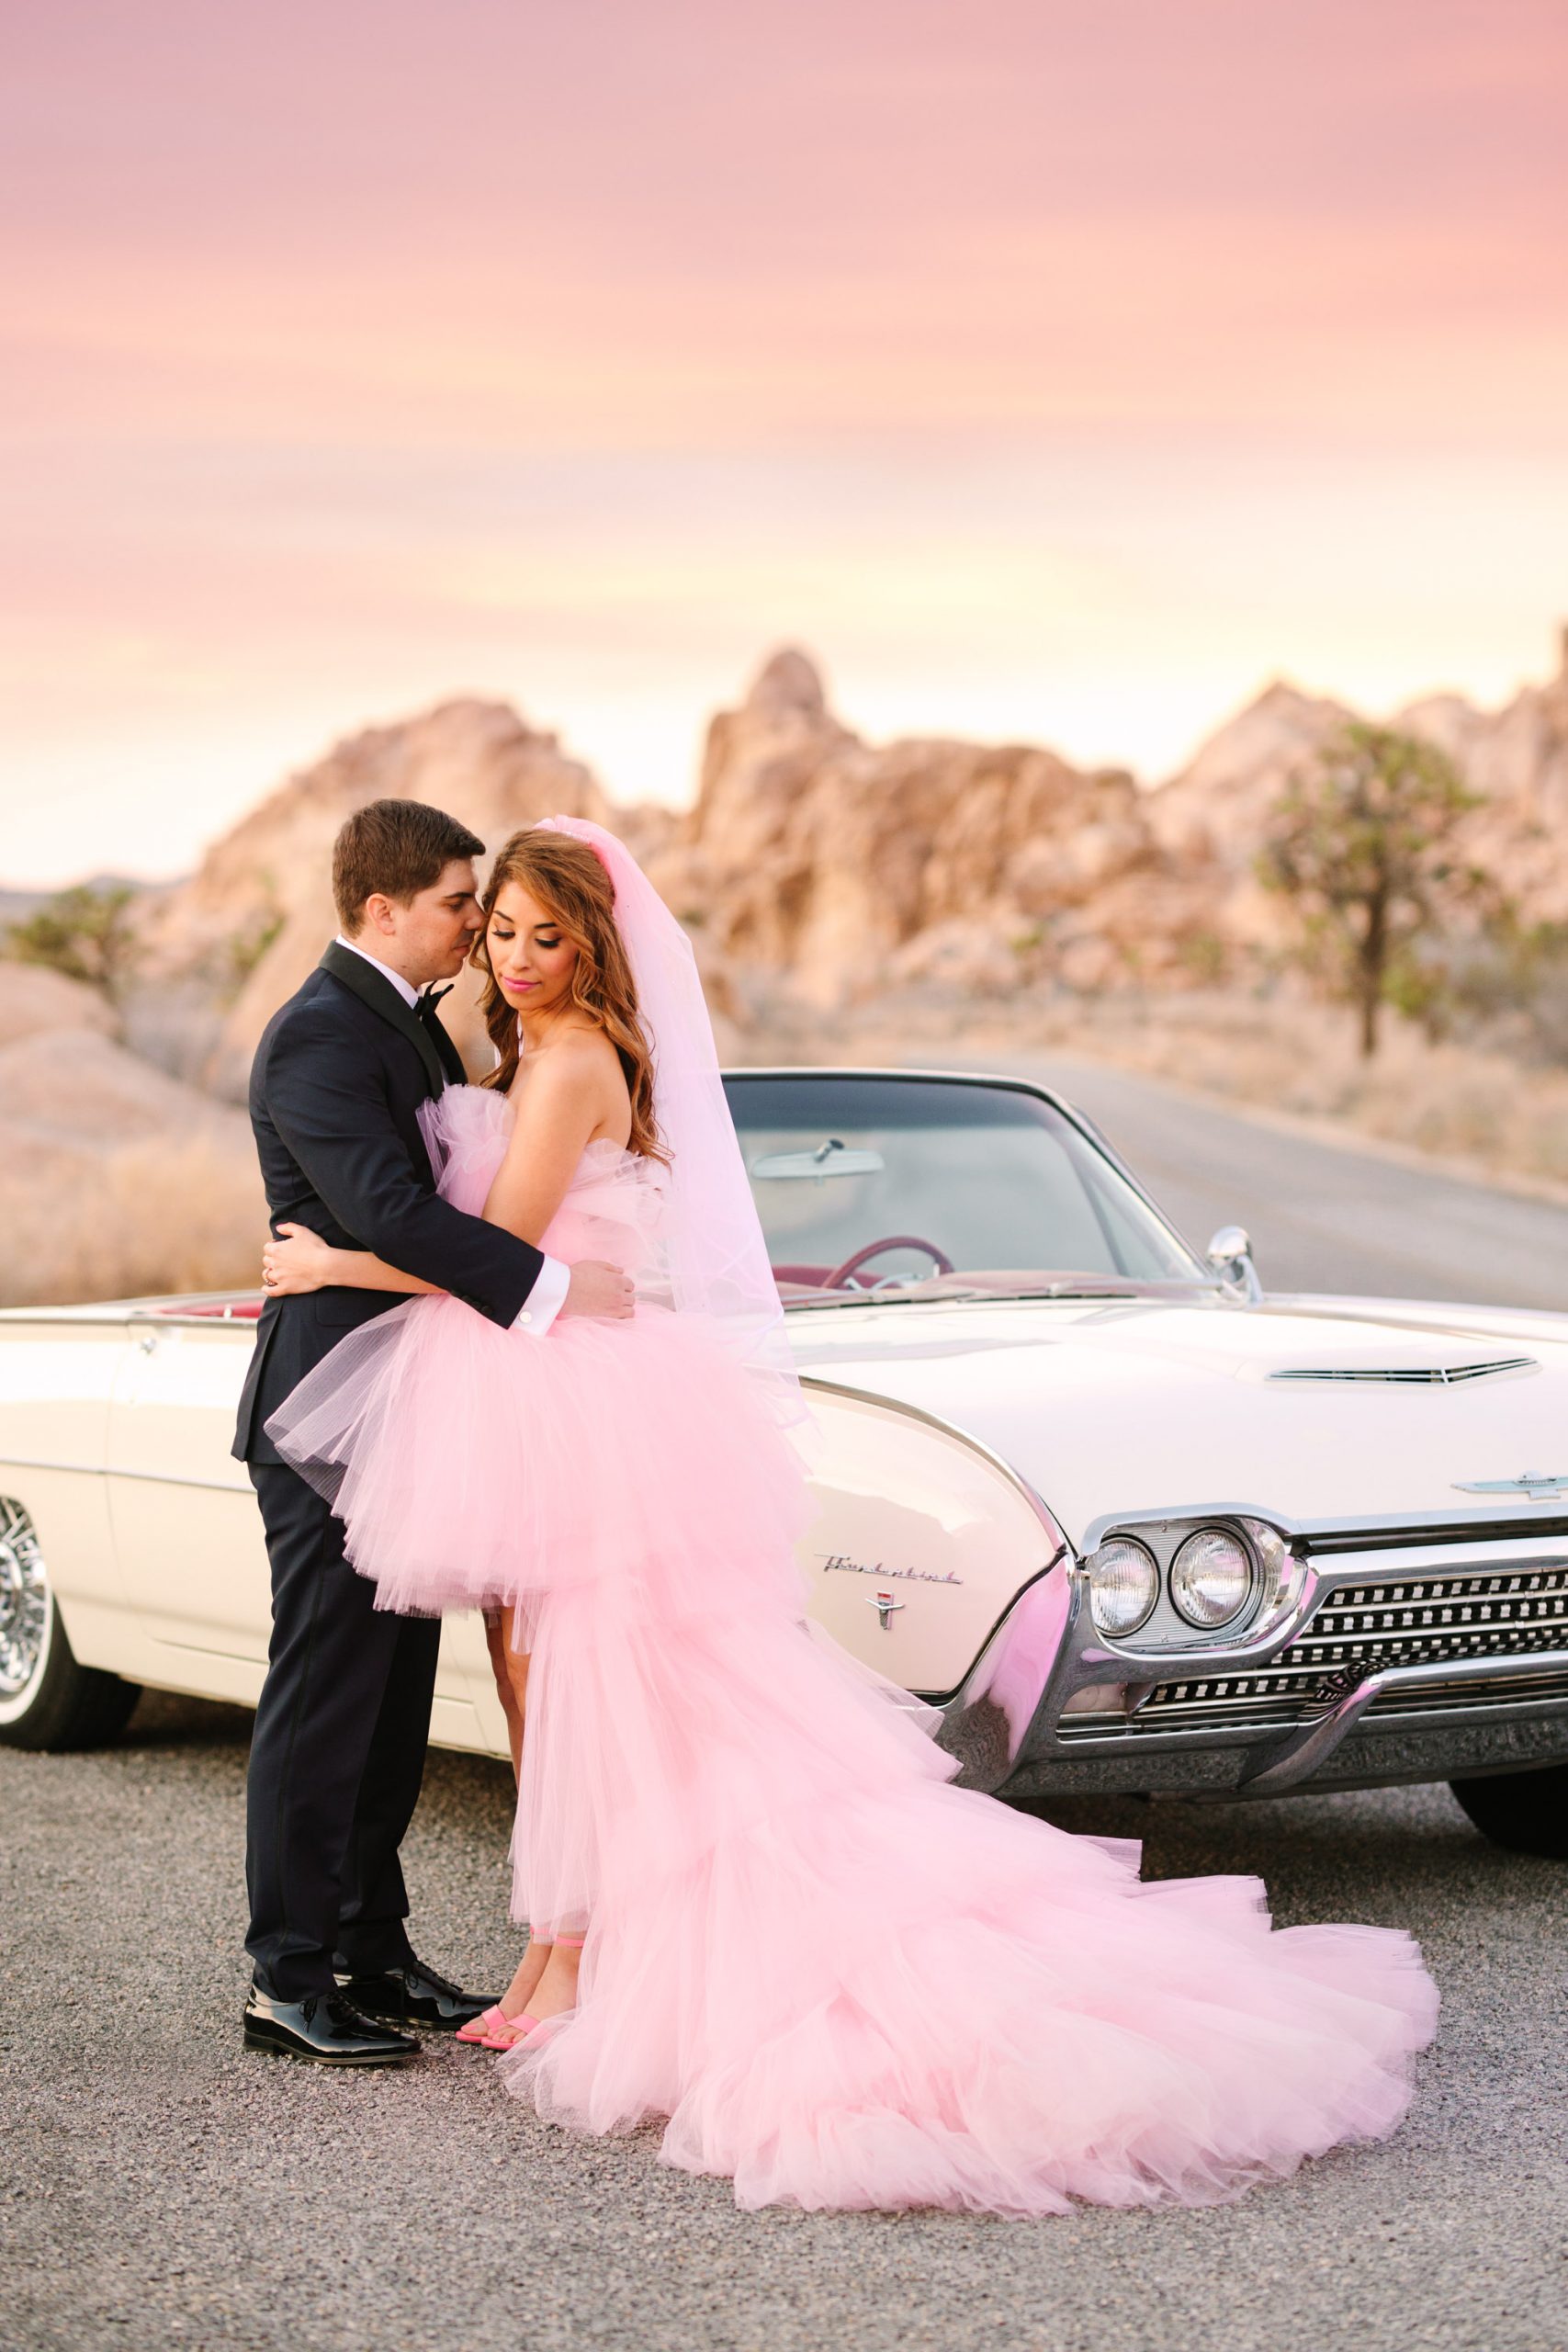 Bride and groom with white classic convertible | Pink wedding dress Joshua Tree elopement featured on Green Wedding Shoes | Colorful desert wedding inspiration for fun-loving couples in Southern California #joshuatreewedding #joshuatreeelopement #pinkwedding #greenweddingshoes Source: Mary Costa Photography | Los Angeles